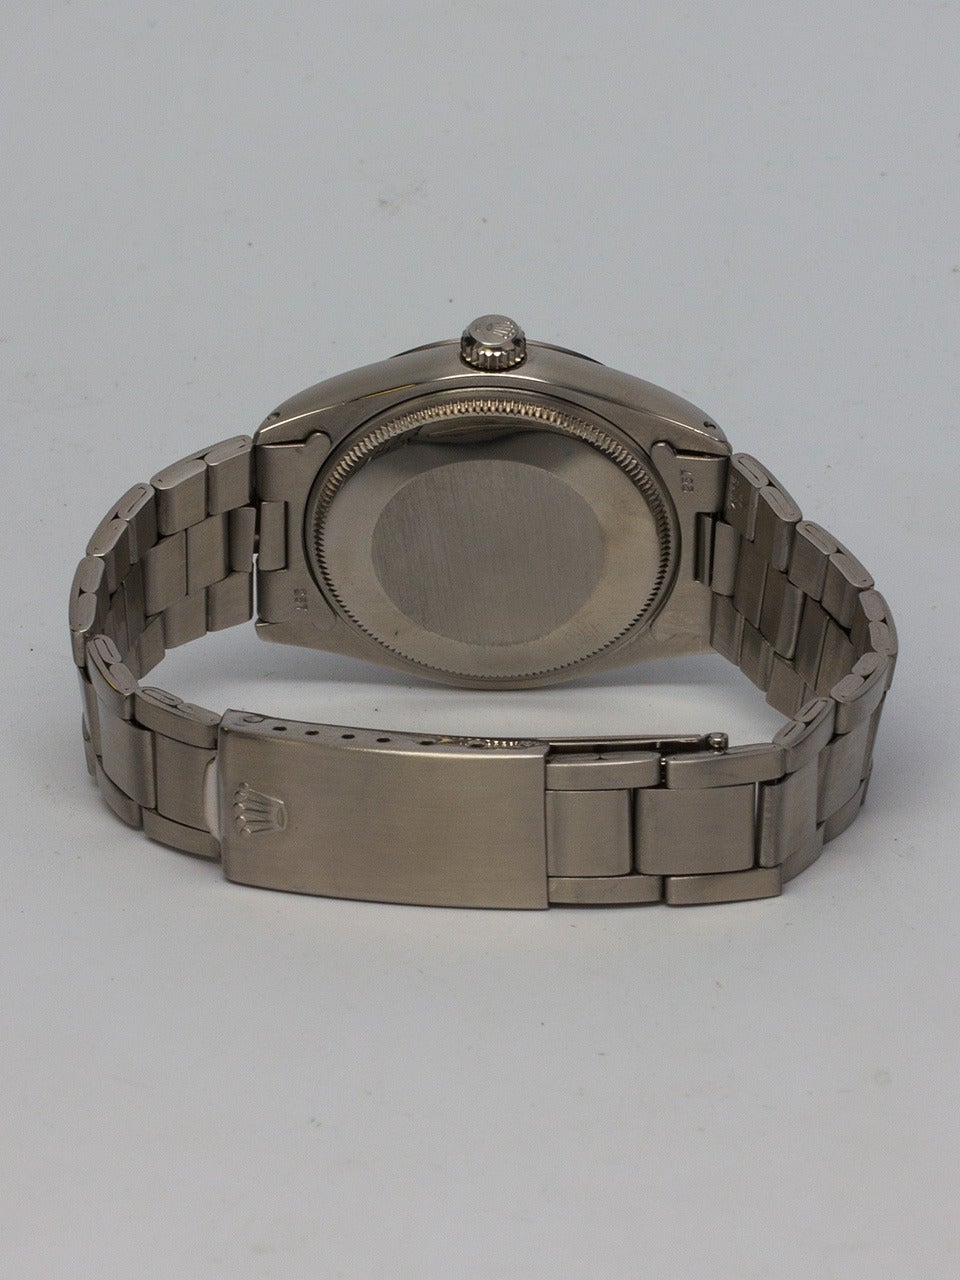 Women's or Men's Rolex Stainless Steel Oyster Perpetual Airking Custom Dial Wristwatch ref 5500